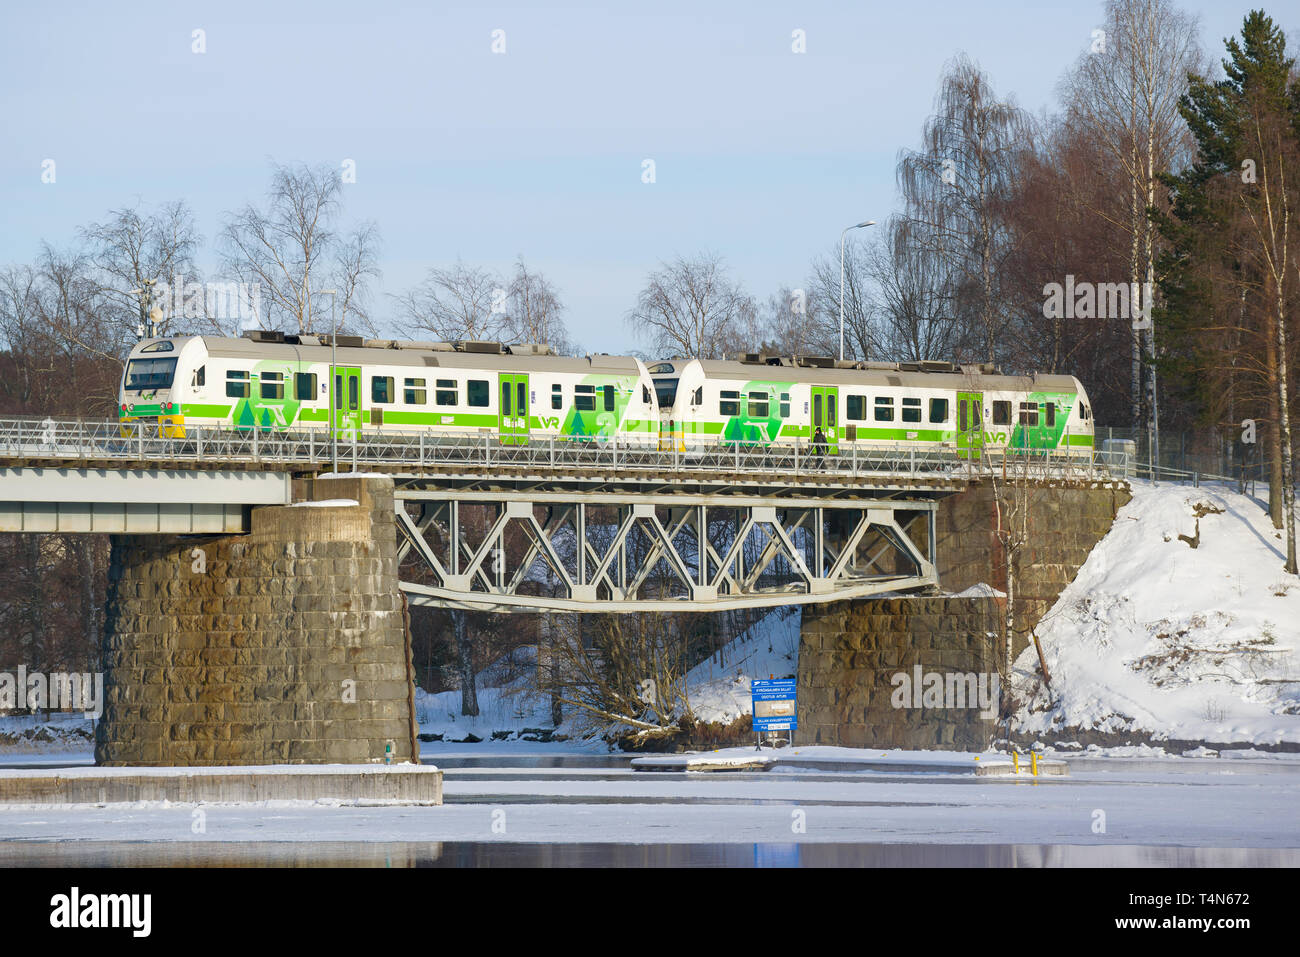 SAVONLINNA, FINLAND - MARCH 03, 2018: The local train on the railway bridge in the sunny March afternoon Stock Photo